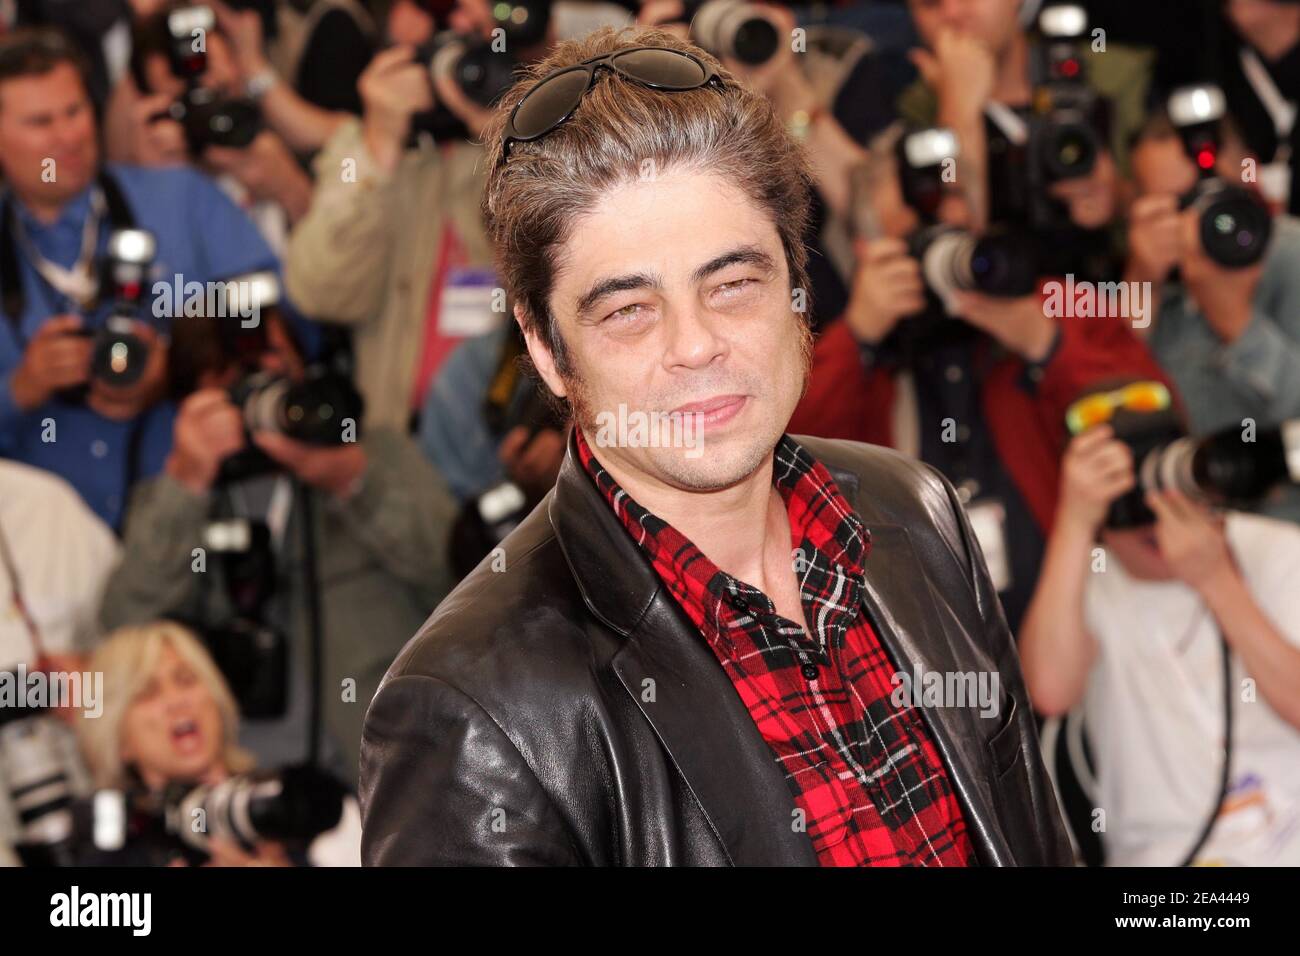 Puerto Rican actor Benicio Del Toro poses during a photocall for US directors Frank Miller and Robert Rodriguez film 'Sin City' during the 58th International Cannes Film Festival, in Cannes, France, on May 18, 2005. Photo by Hahn-Klein-Nebinger/ABACA. Stock Photo